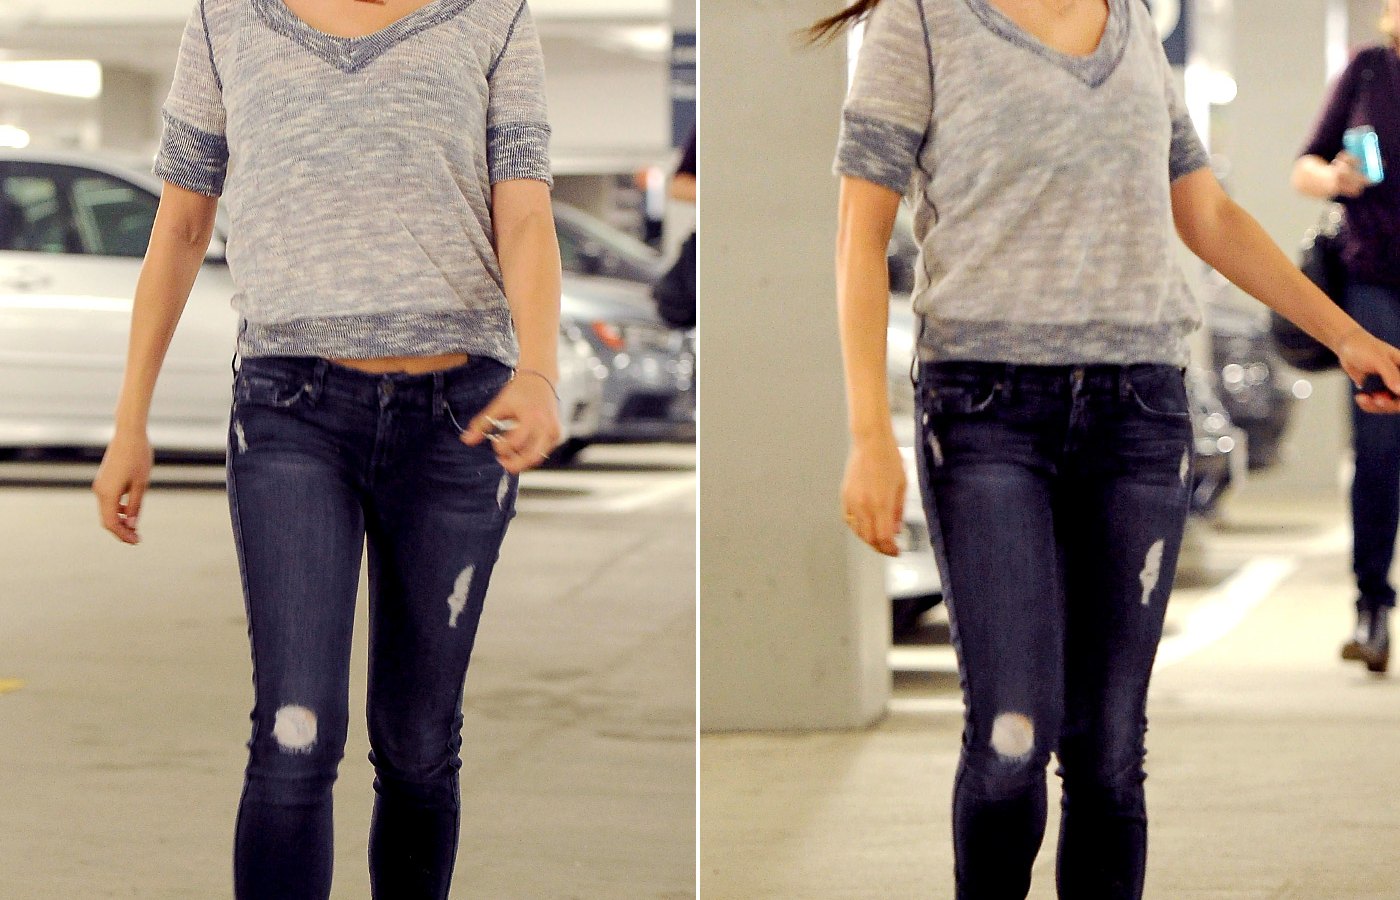 Mila Kunis shows her stomach in skinny jeans on Feb. 11, 2015.